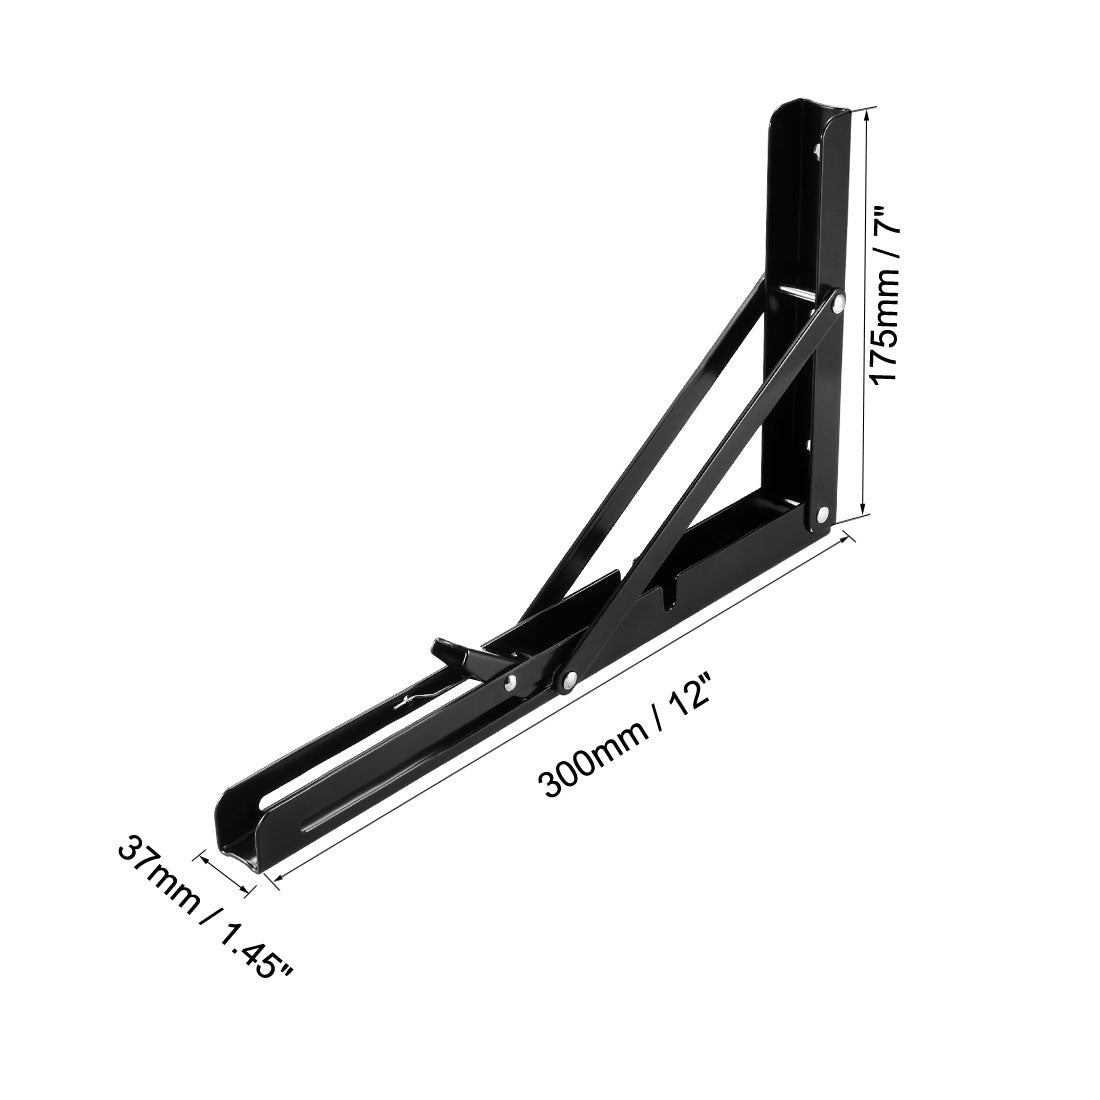 uxcell Uxcell Folding Bracket 12 Inch 300mm for Shelves Table Desk Wall Mounted Support Collapsible Long Release Arm Space Saving Carbon Steel